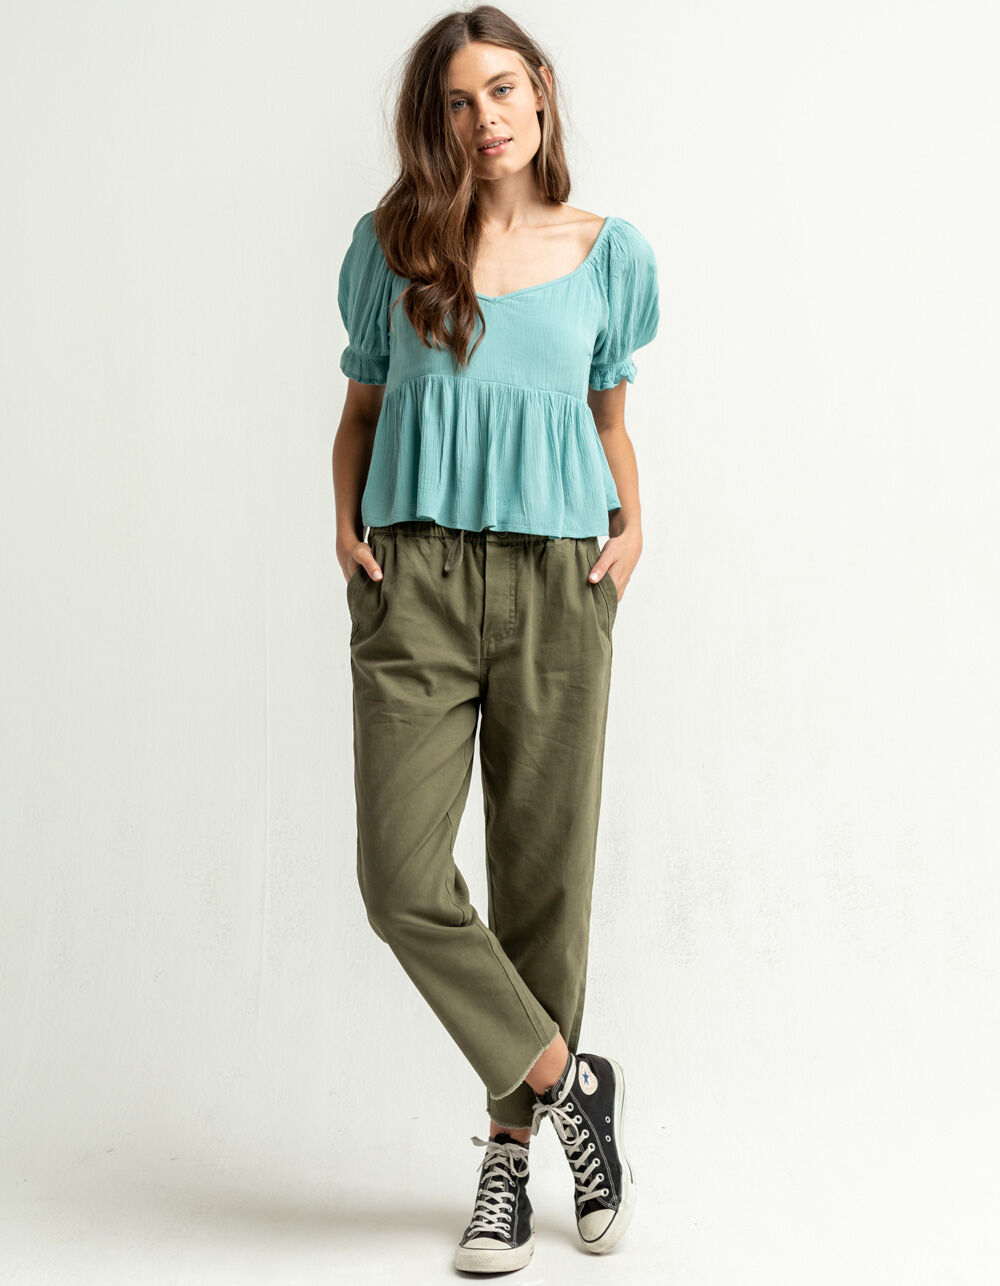 O'NEILL Isabel Solid Womens Top - BLUE | Tillys